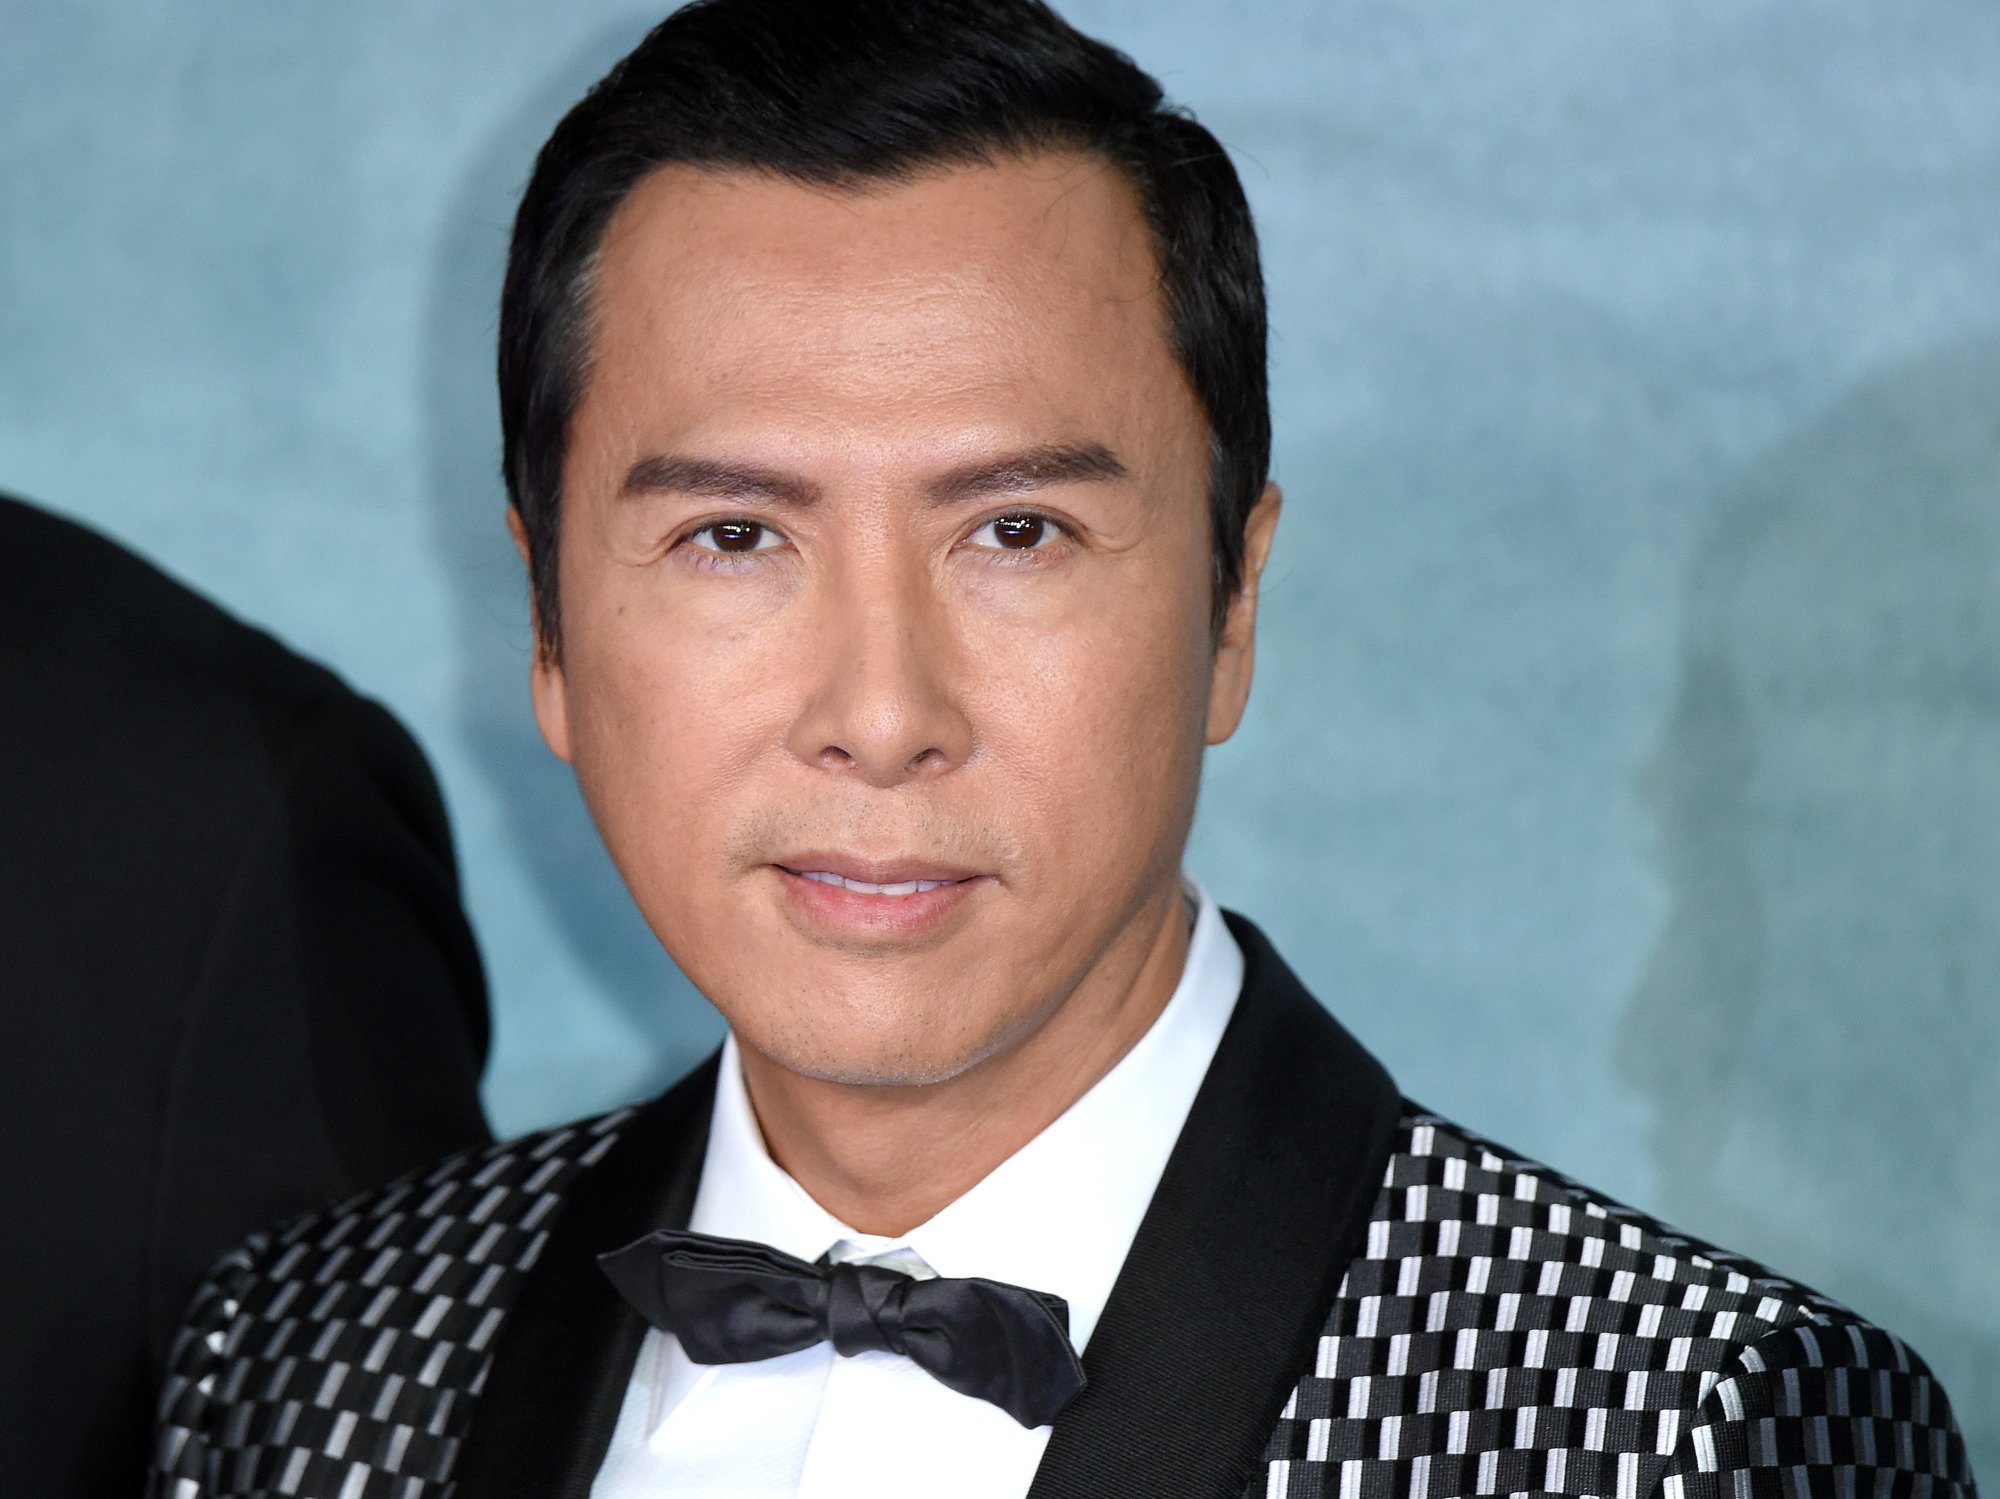 'John Wick 4' actor Donnie Yen wearing a black and white suit in front of a blue background